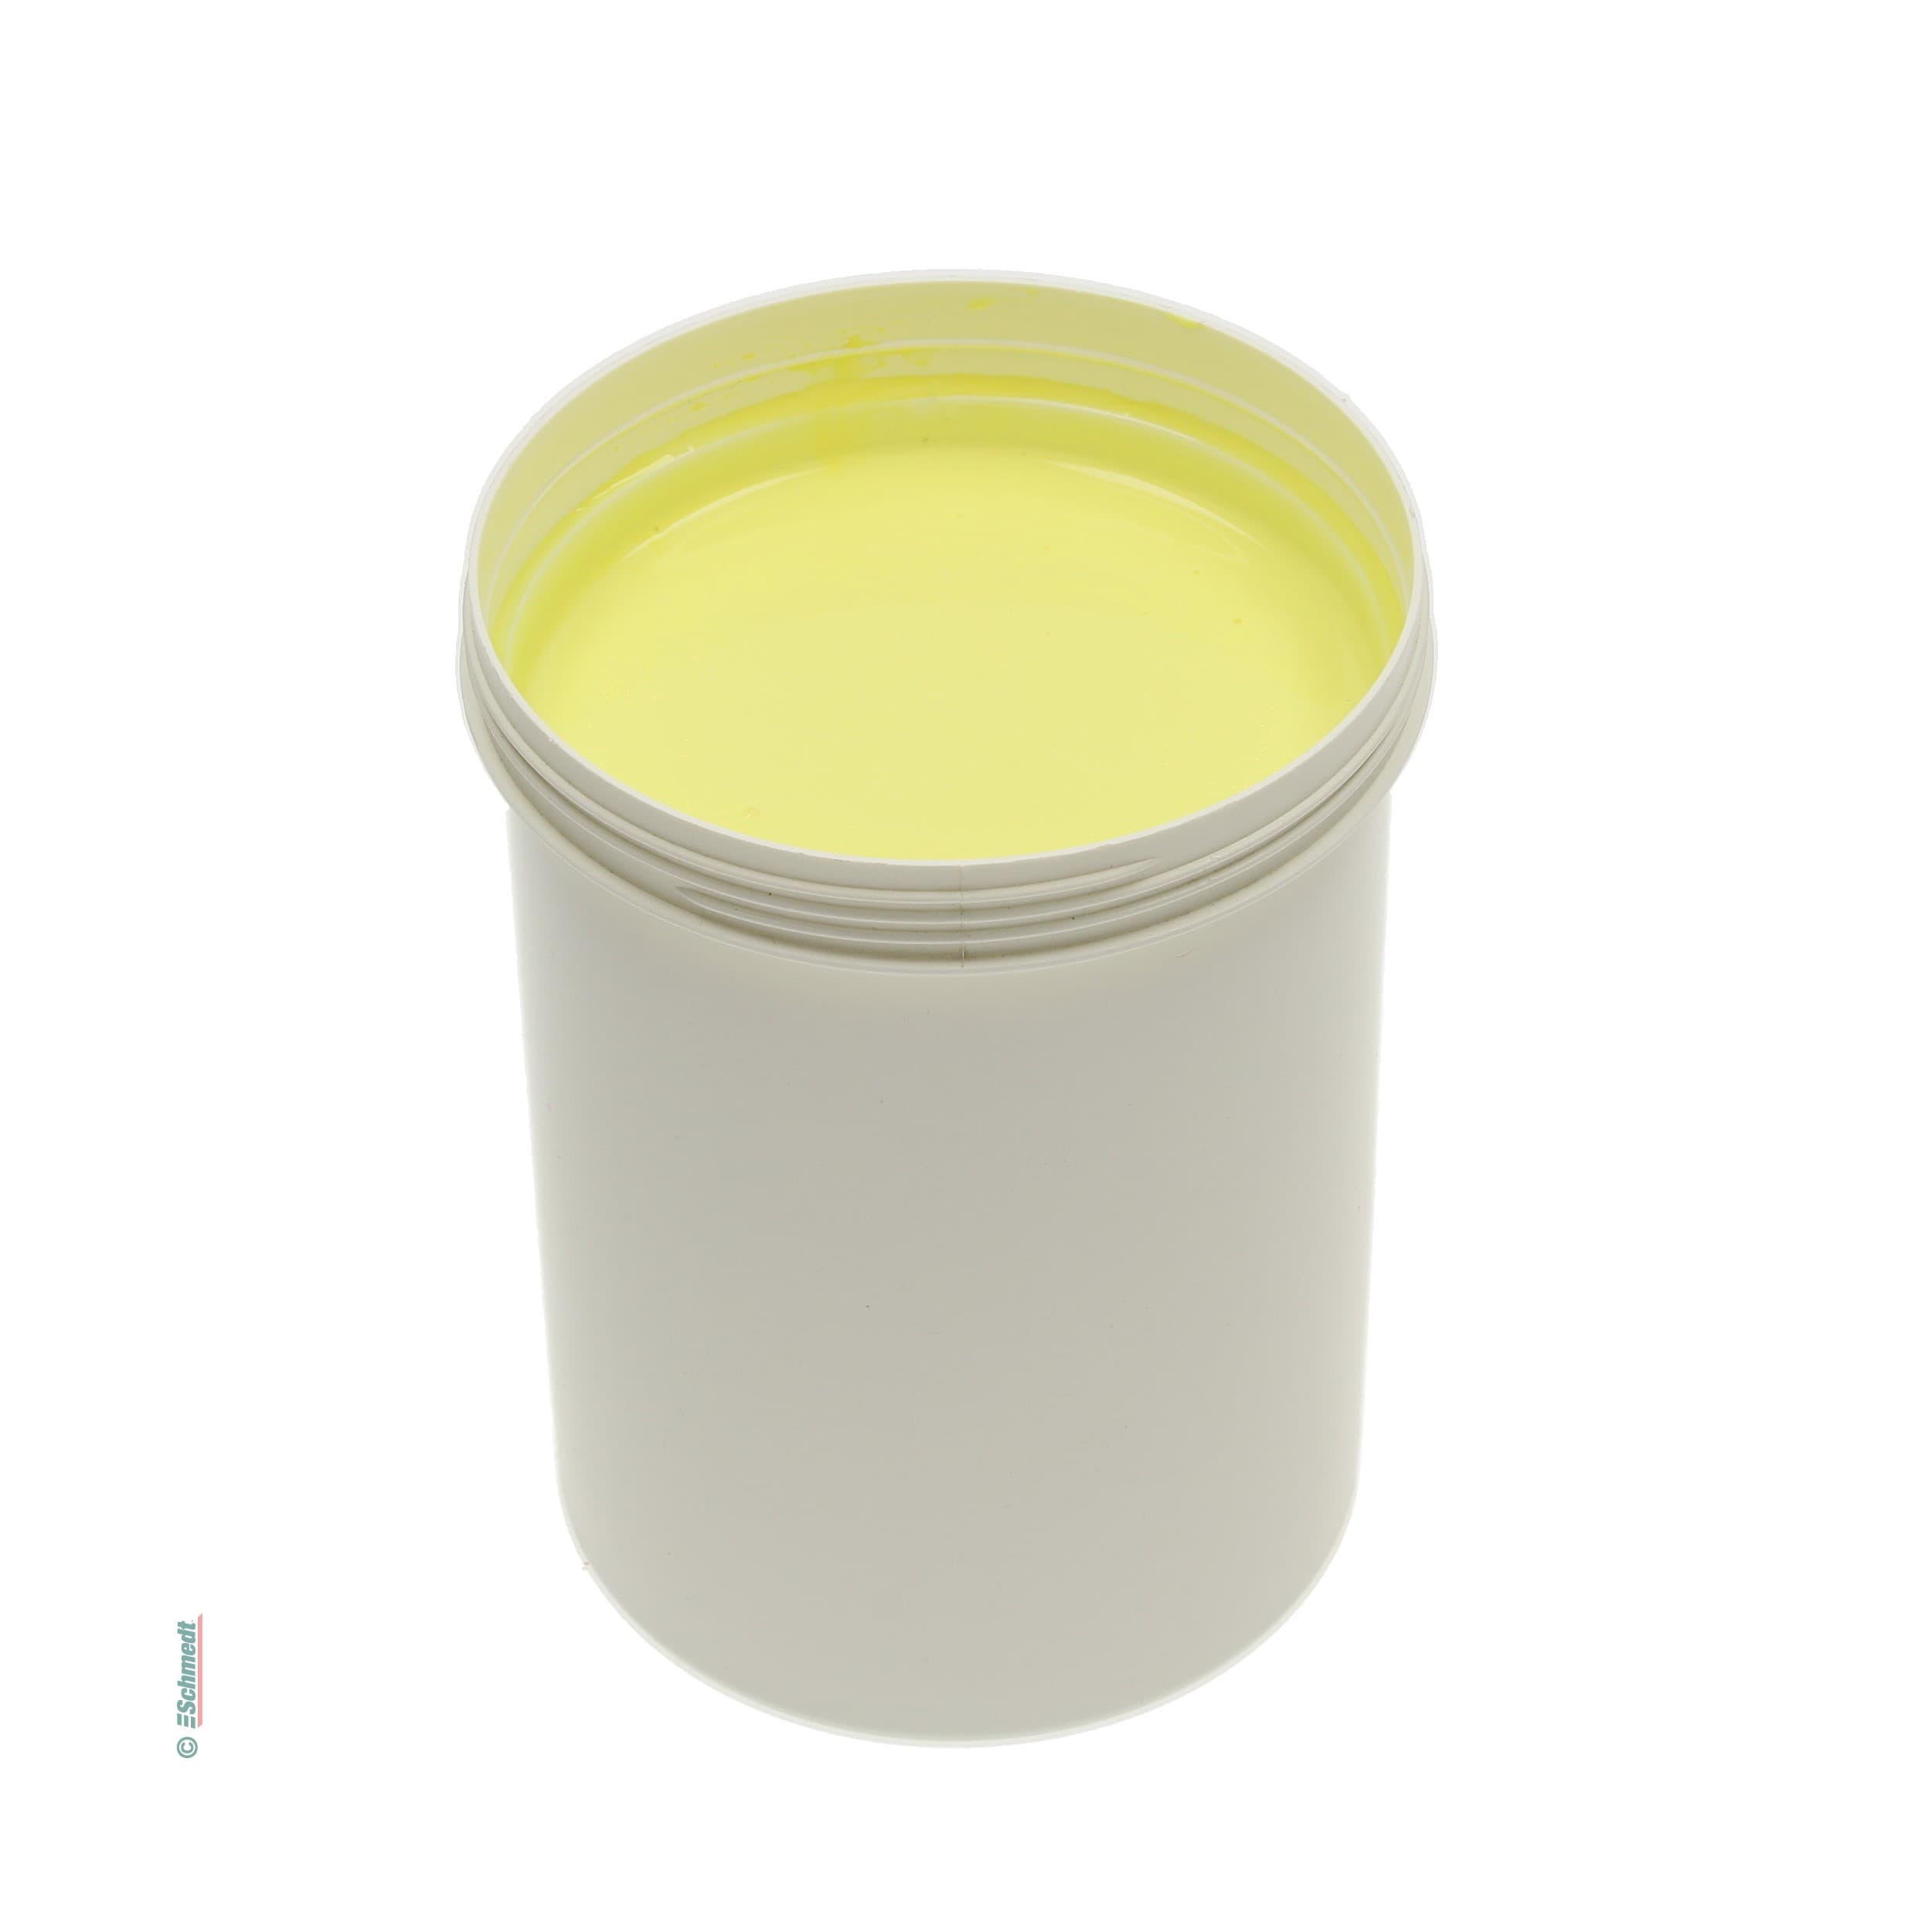 Glue dye - Colour yellow - Contents Bottle / 990 ml - to dye dispersion glues such as pad-binding or perfect-binding glue to bind note pads ... - image-1